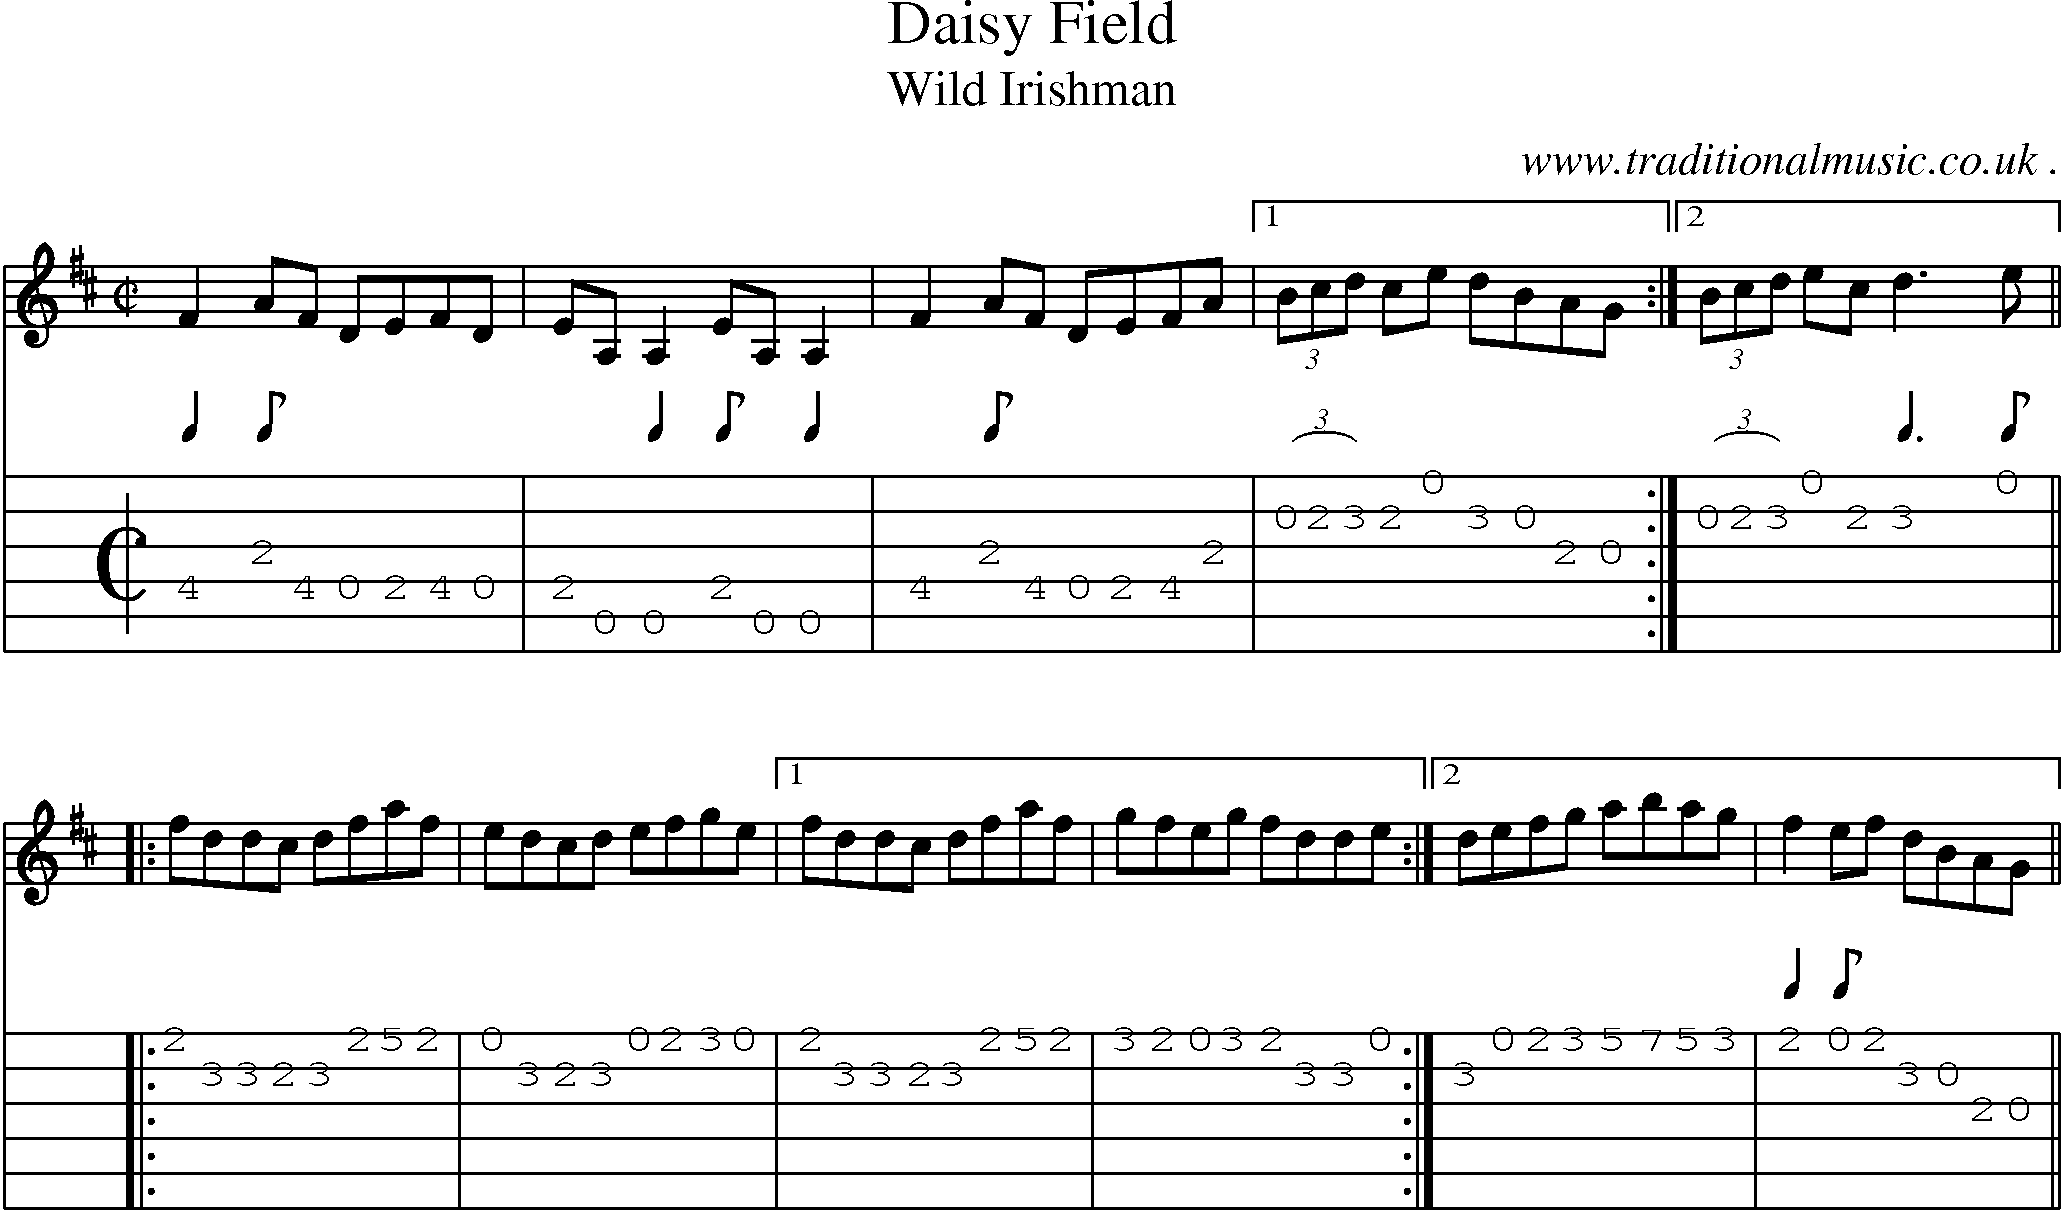 Sheet-Music and Guitar Tabs for Daisy Field